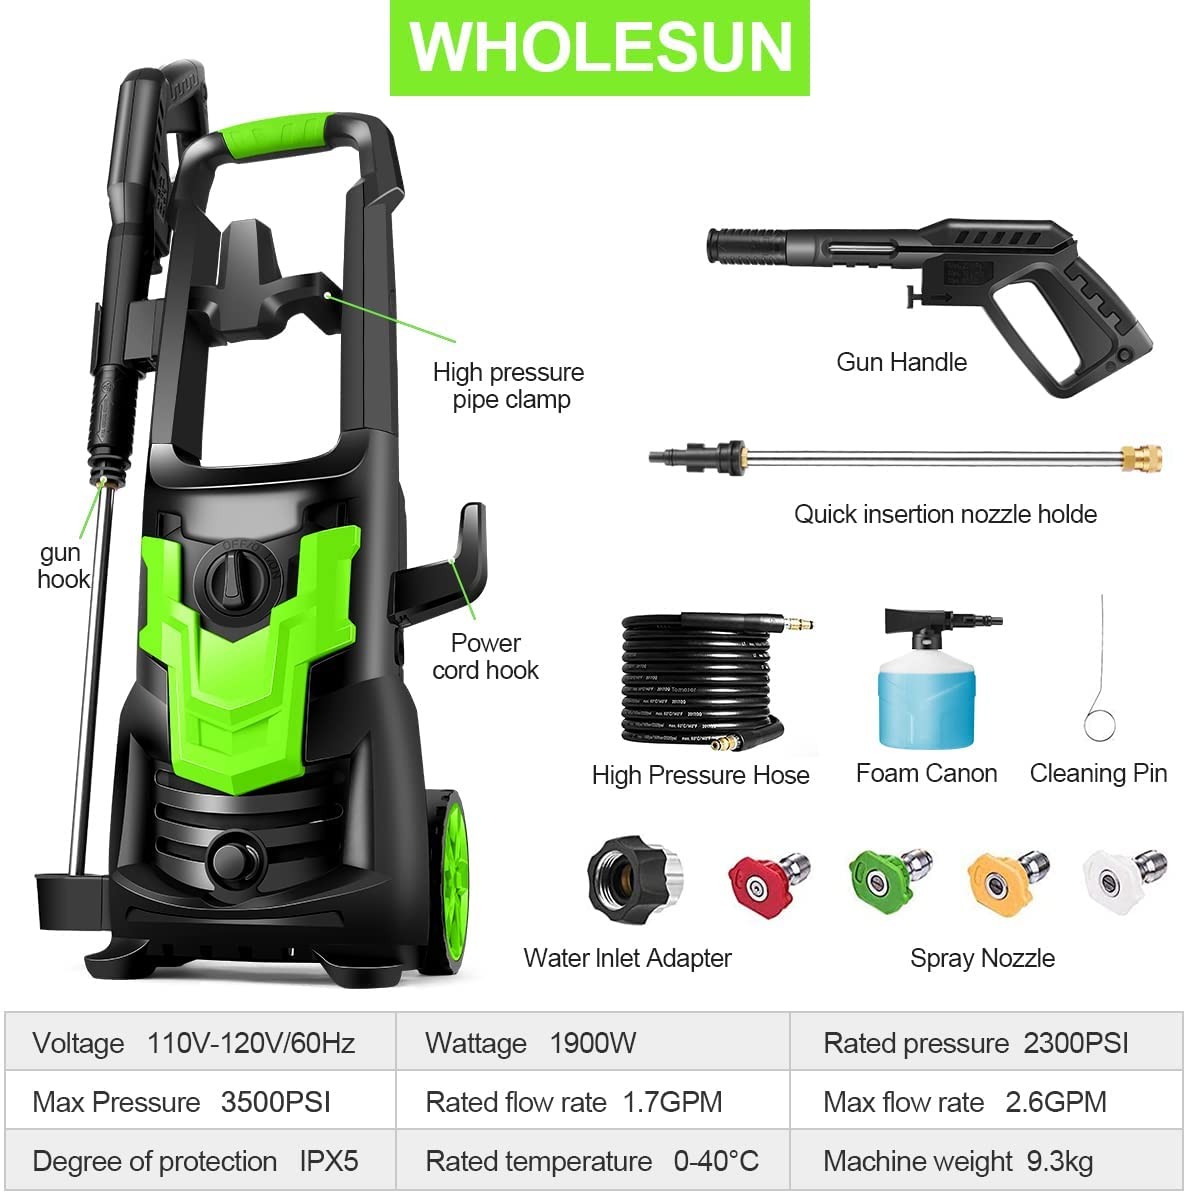 High Pressure Cleaner Machine with 4 Nozzles Foam Cannon,Best for Cleaning